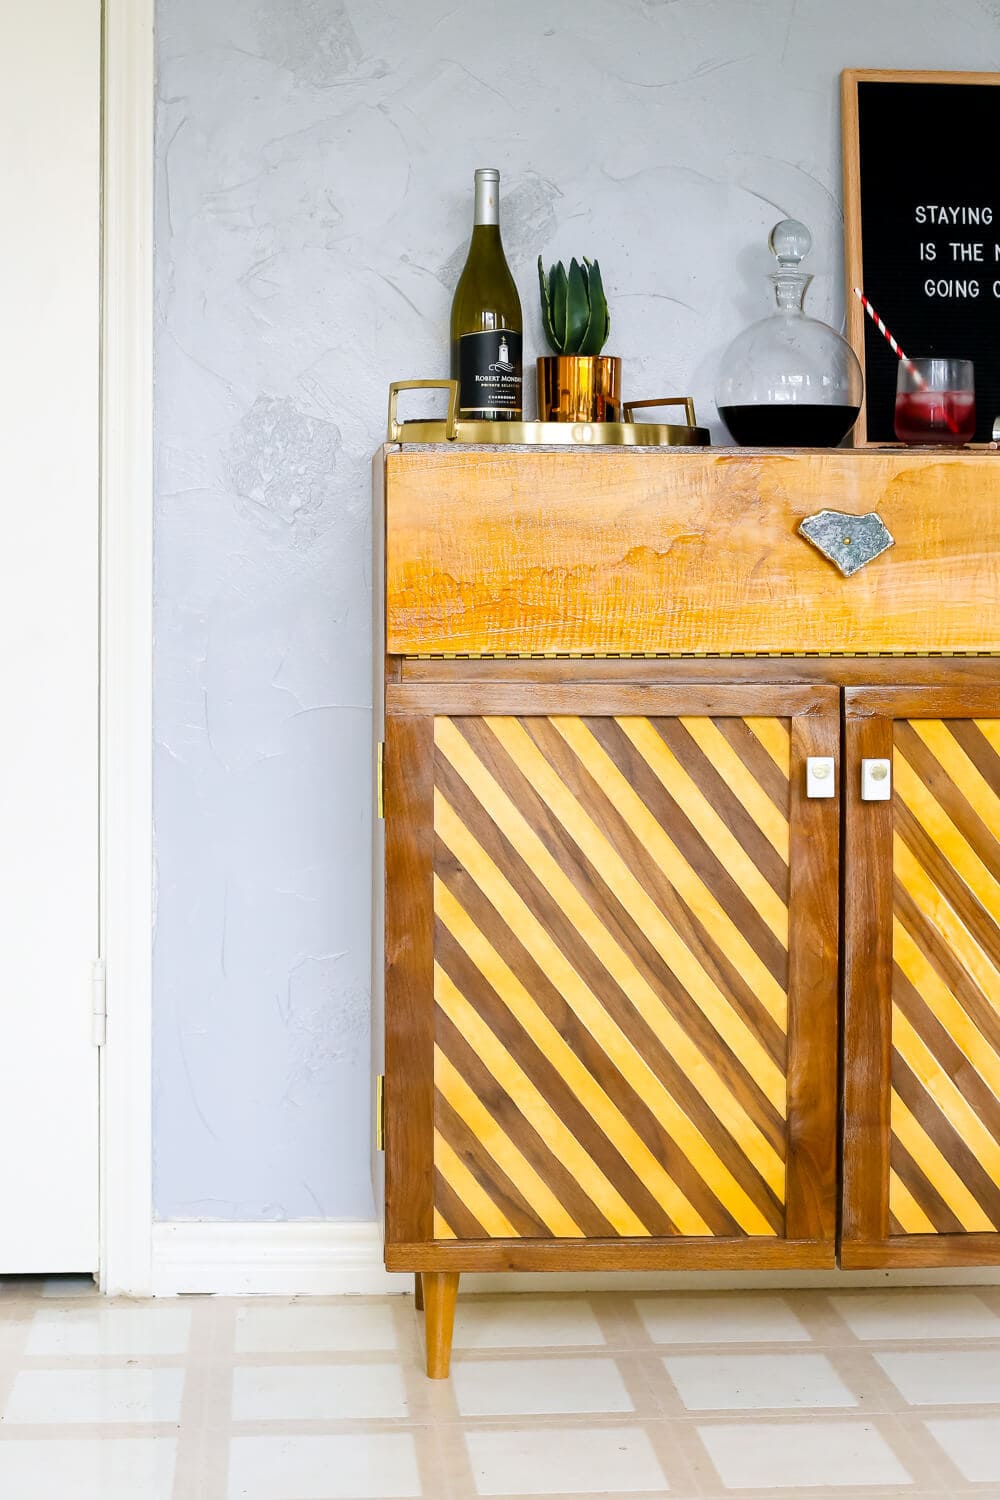 This DIY bar cart is gorgeous! How to use a paint sprayer to finish furniture, how to style a gorgeous bar cart. Great tips and ideas!